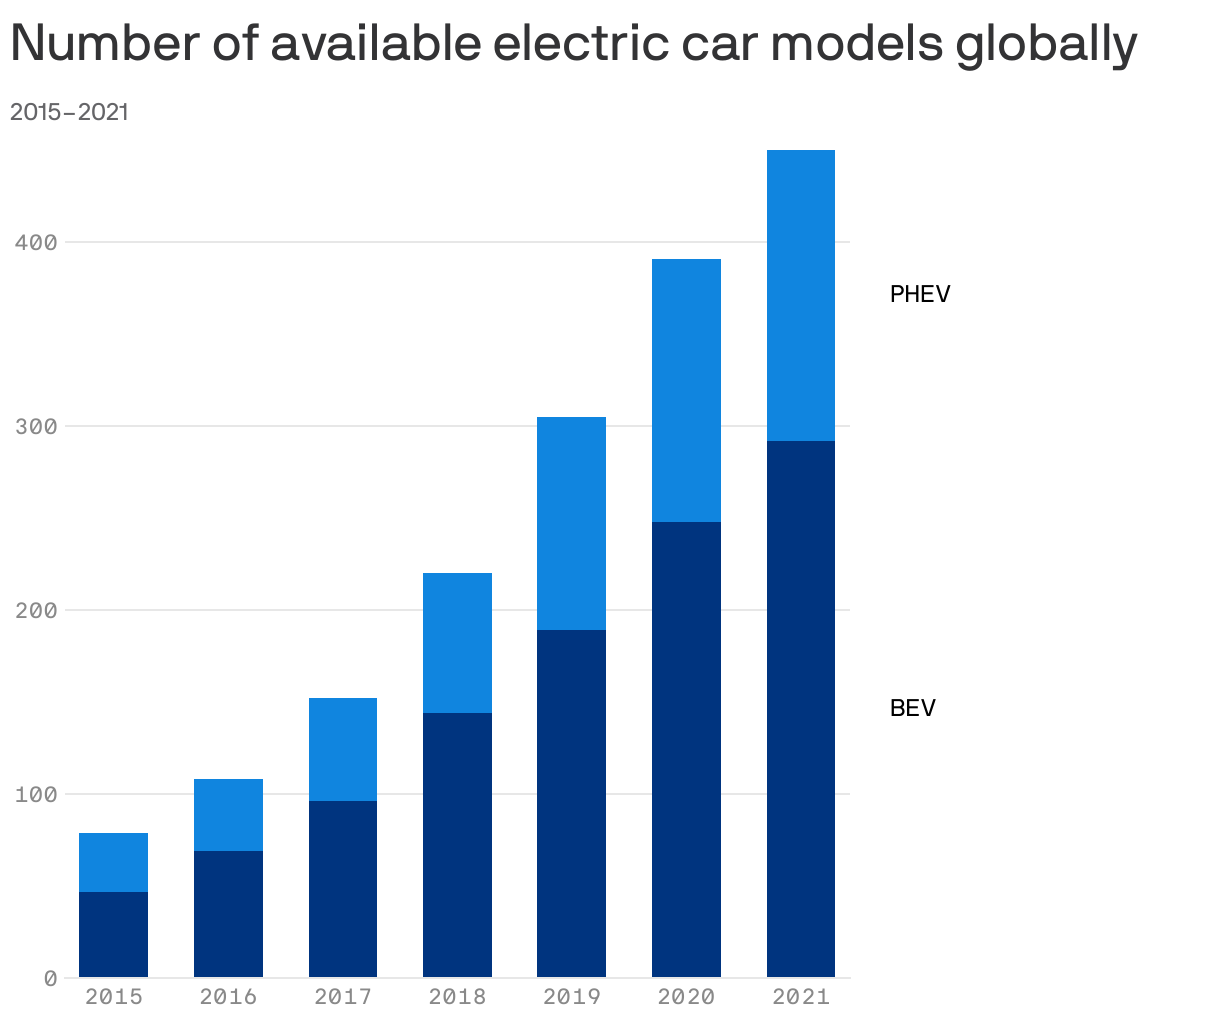 Number of available electric car models globally